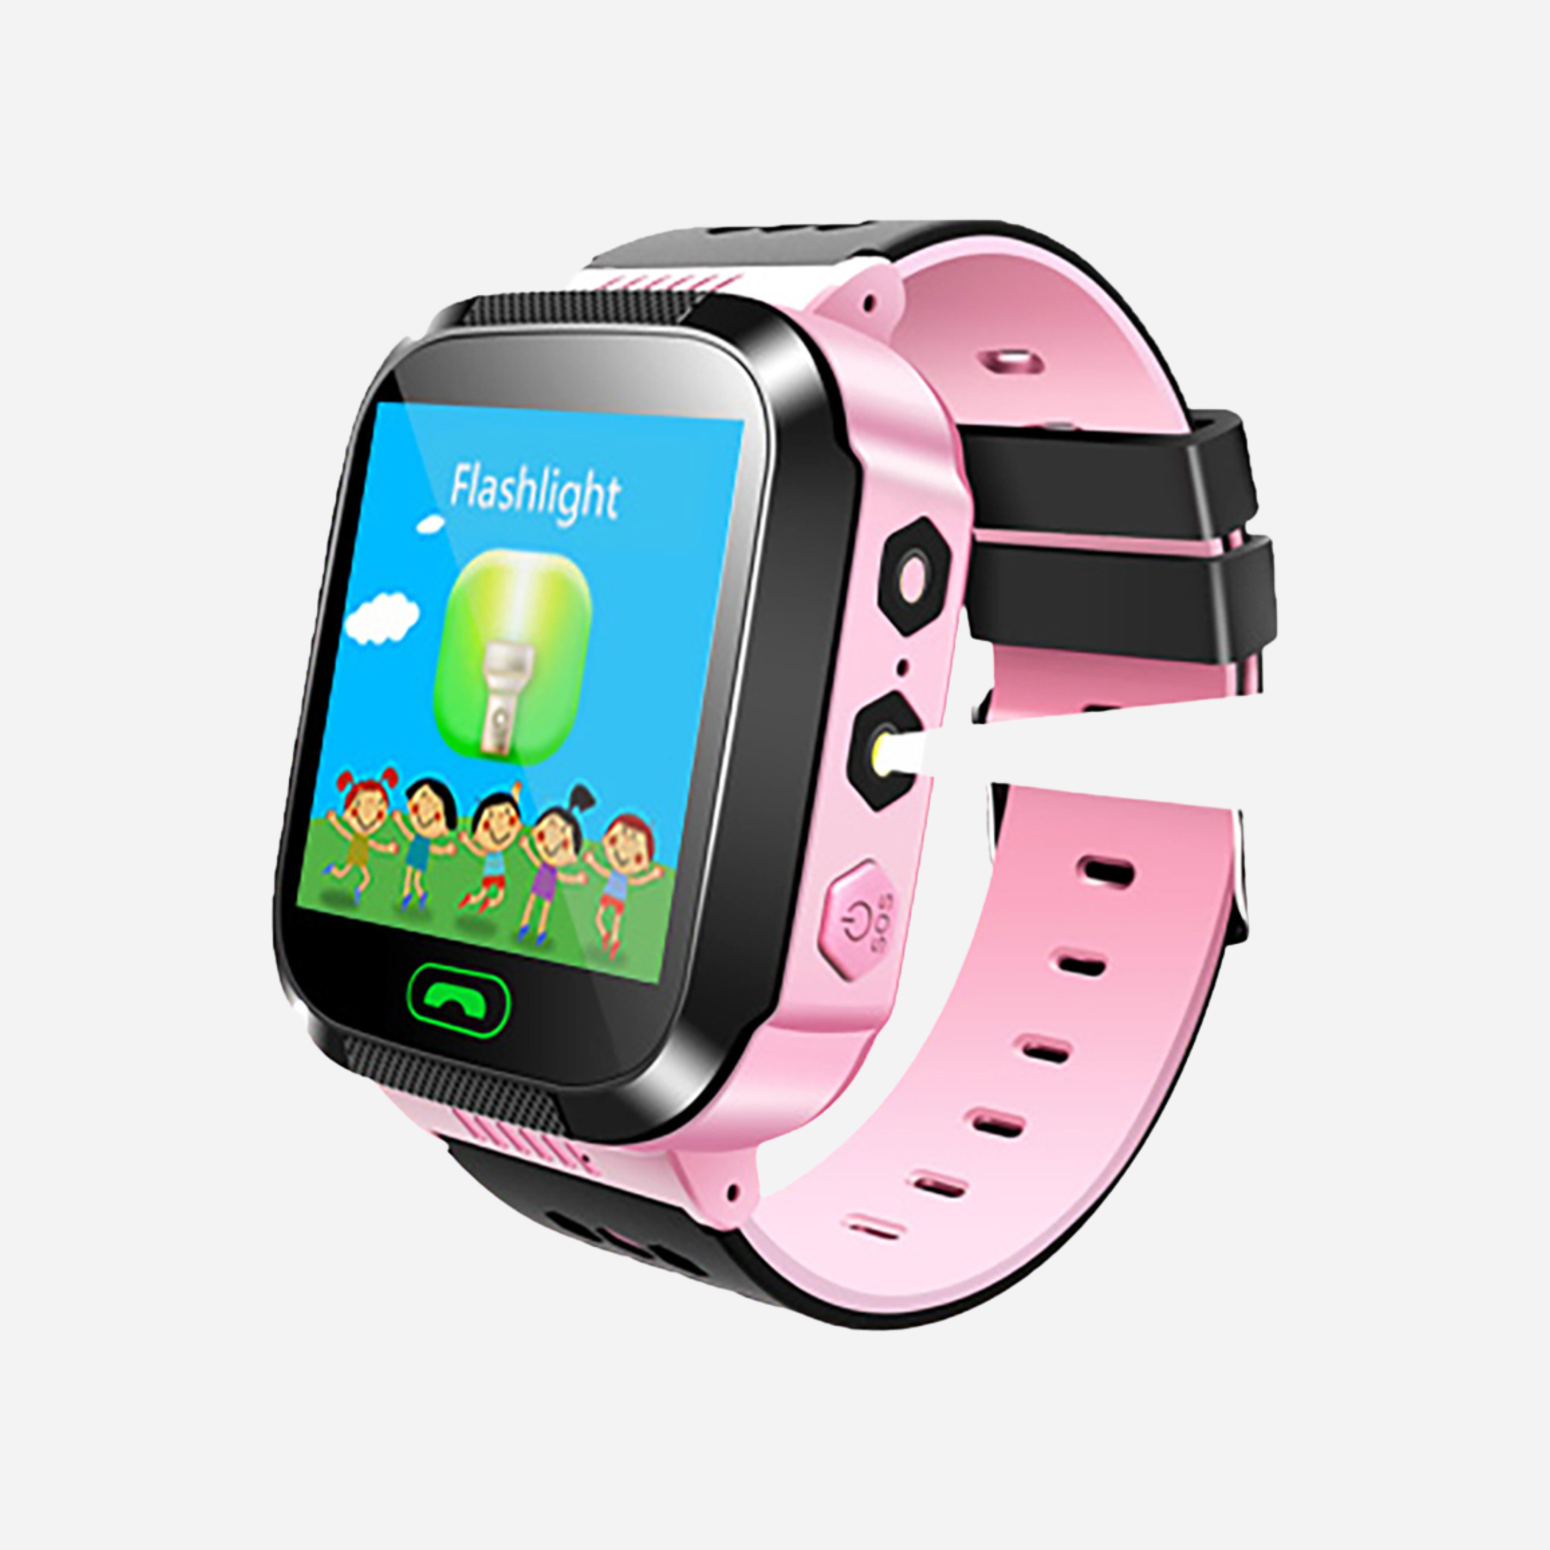 sekyo-secura-x1-smartwatch-voice-calling-location-tracking-sos-camera-remote-monitoring-36mm-easy-to-use-pink-blue